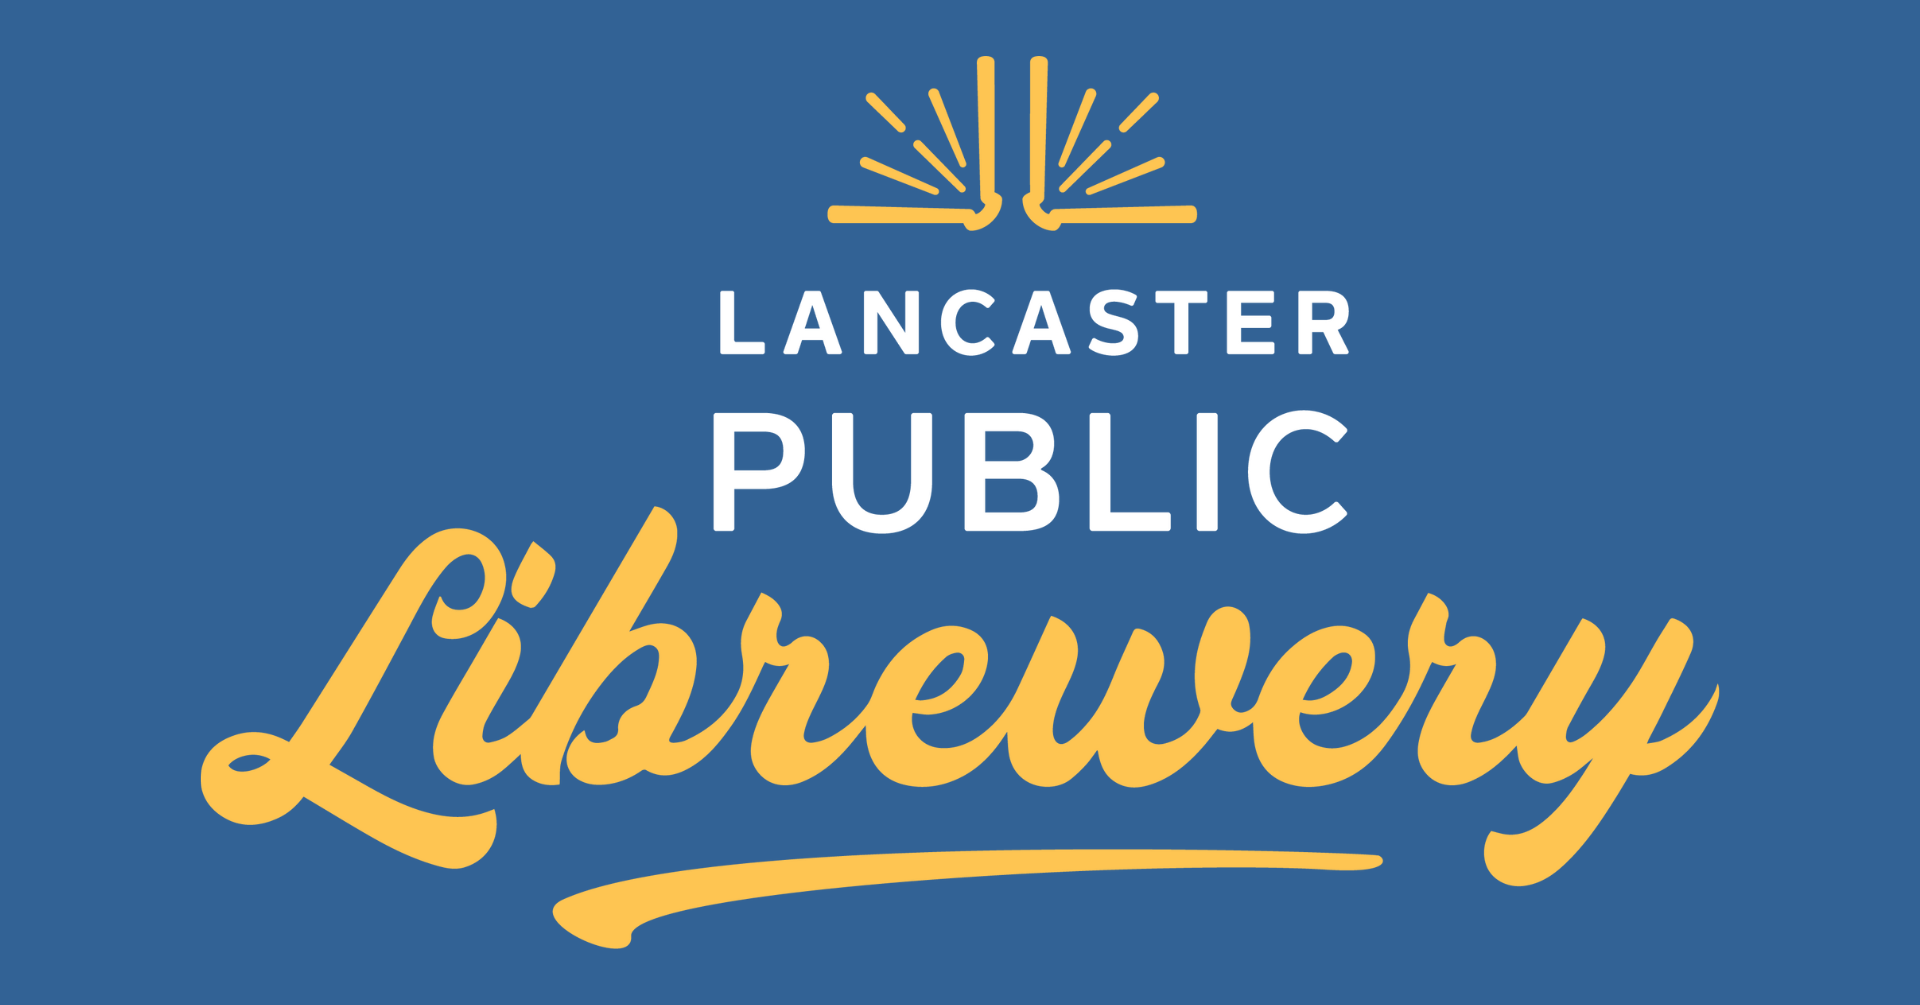 Blue background with the words Lacaster Public Librewery in yellow font